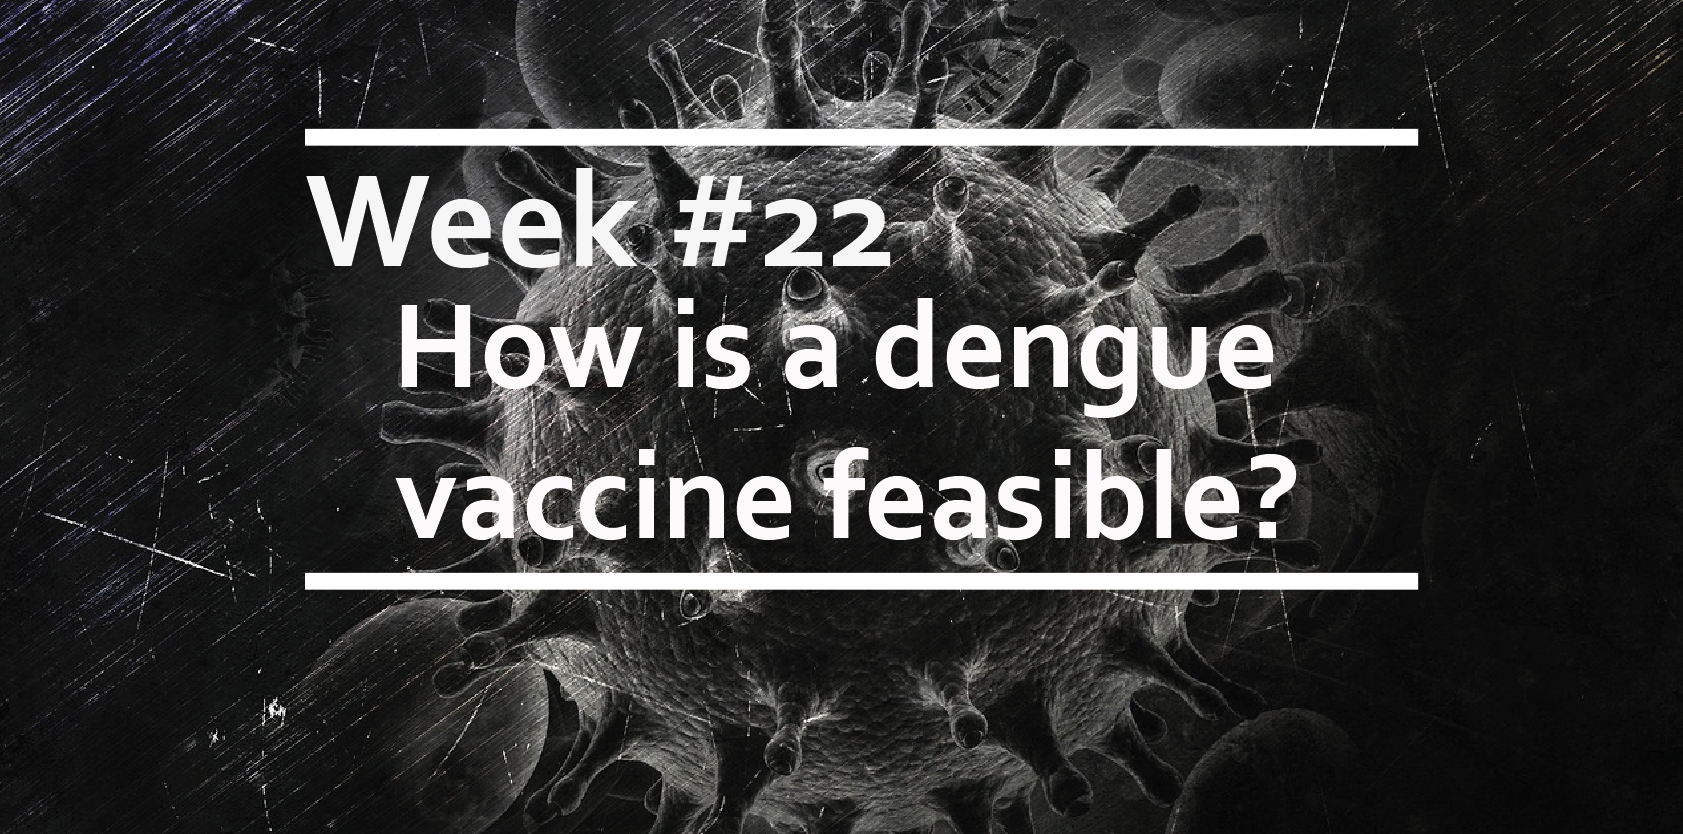 How is a dengue vaccine feasible?